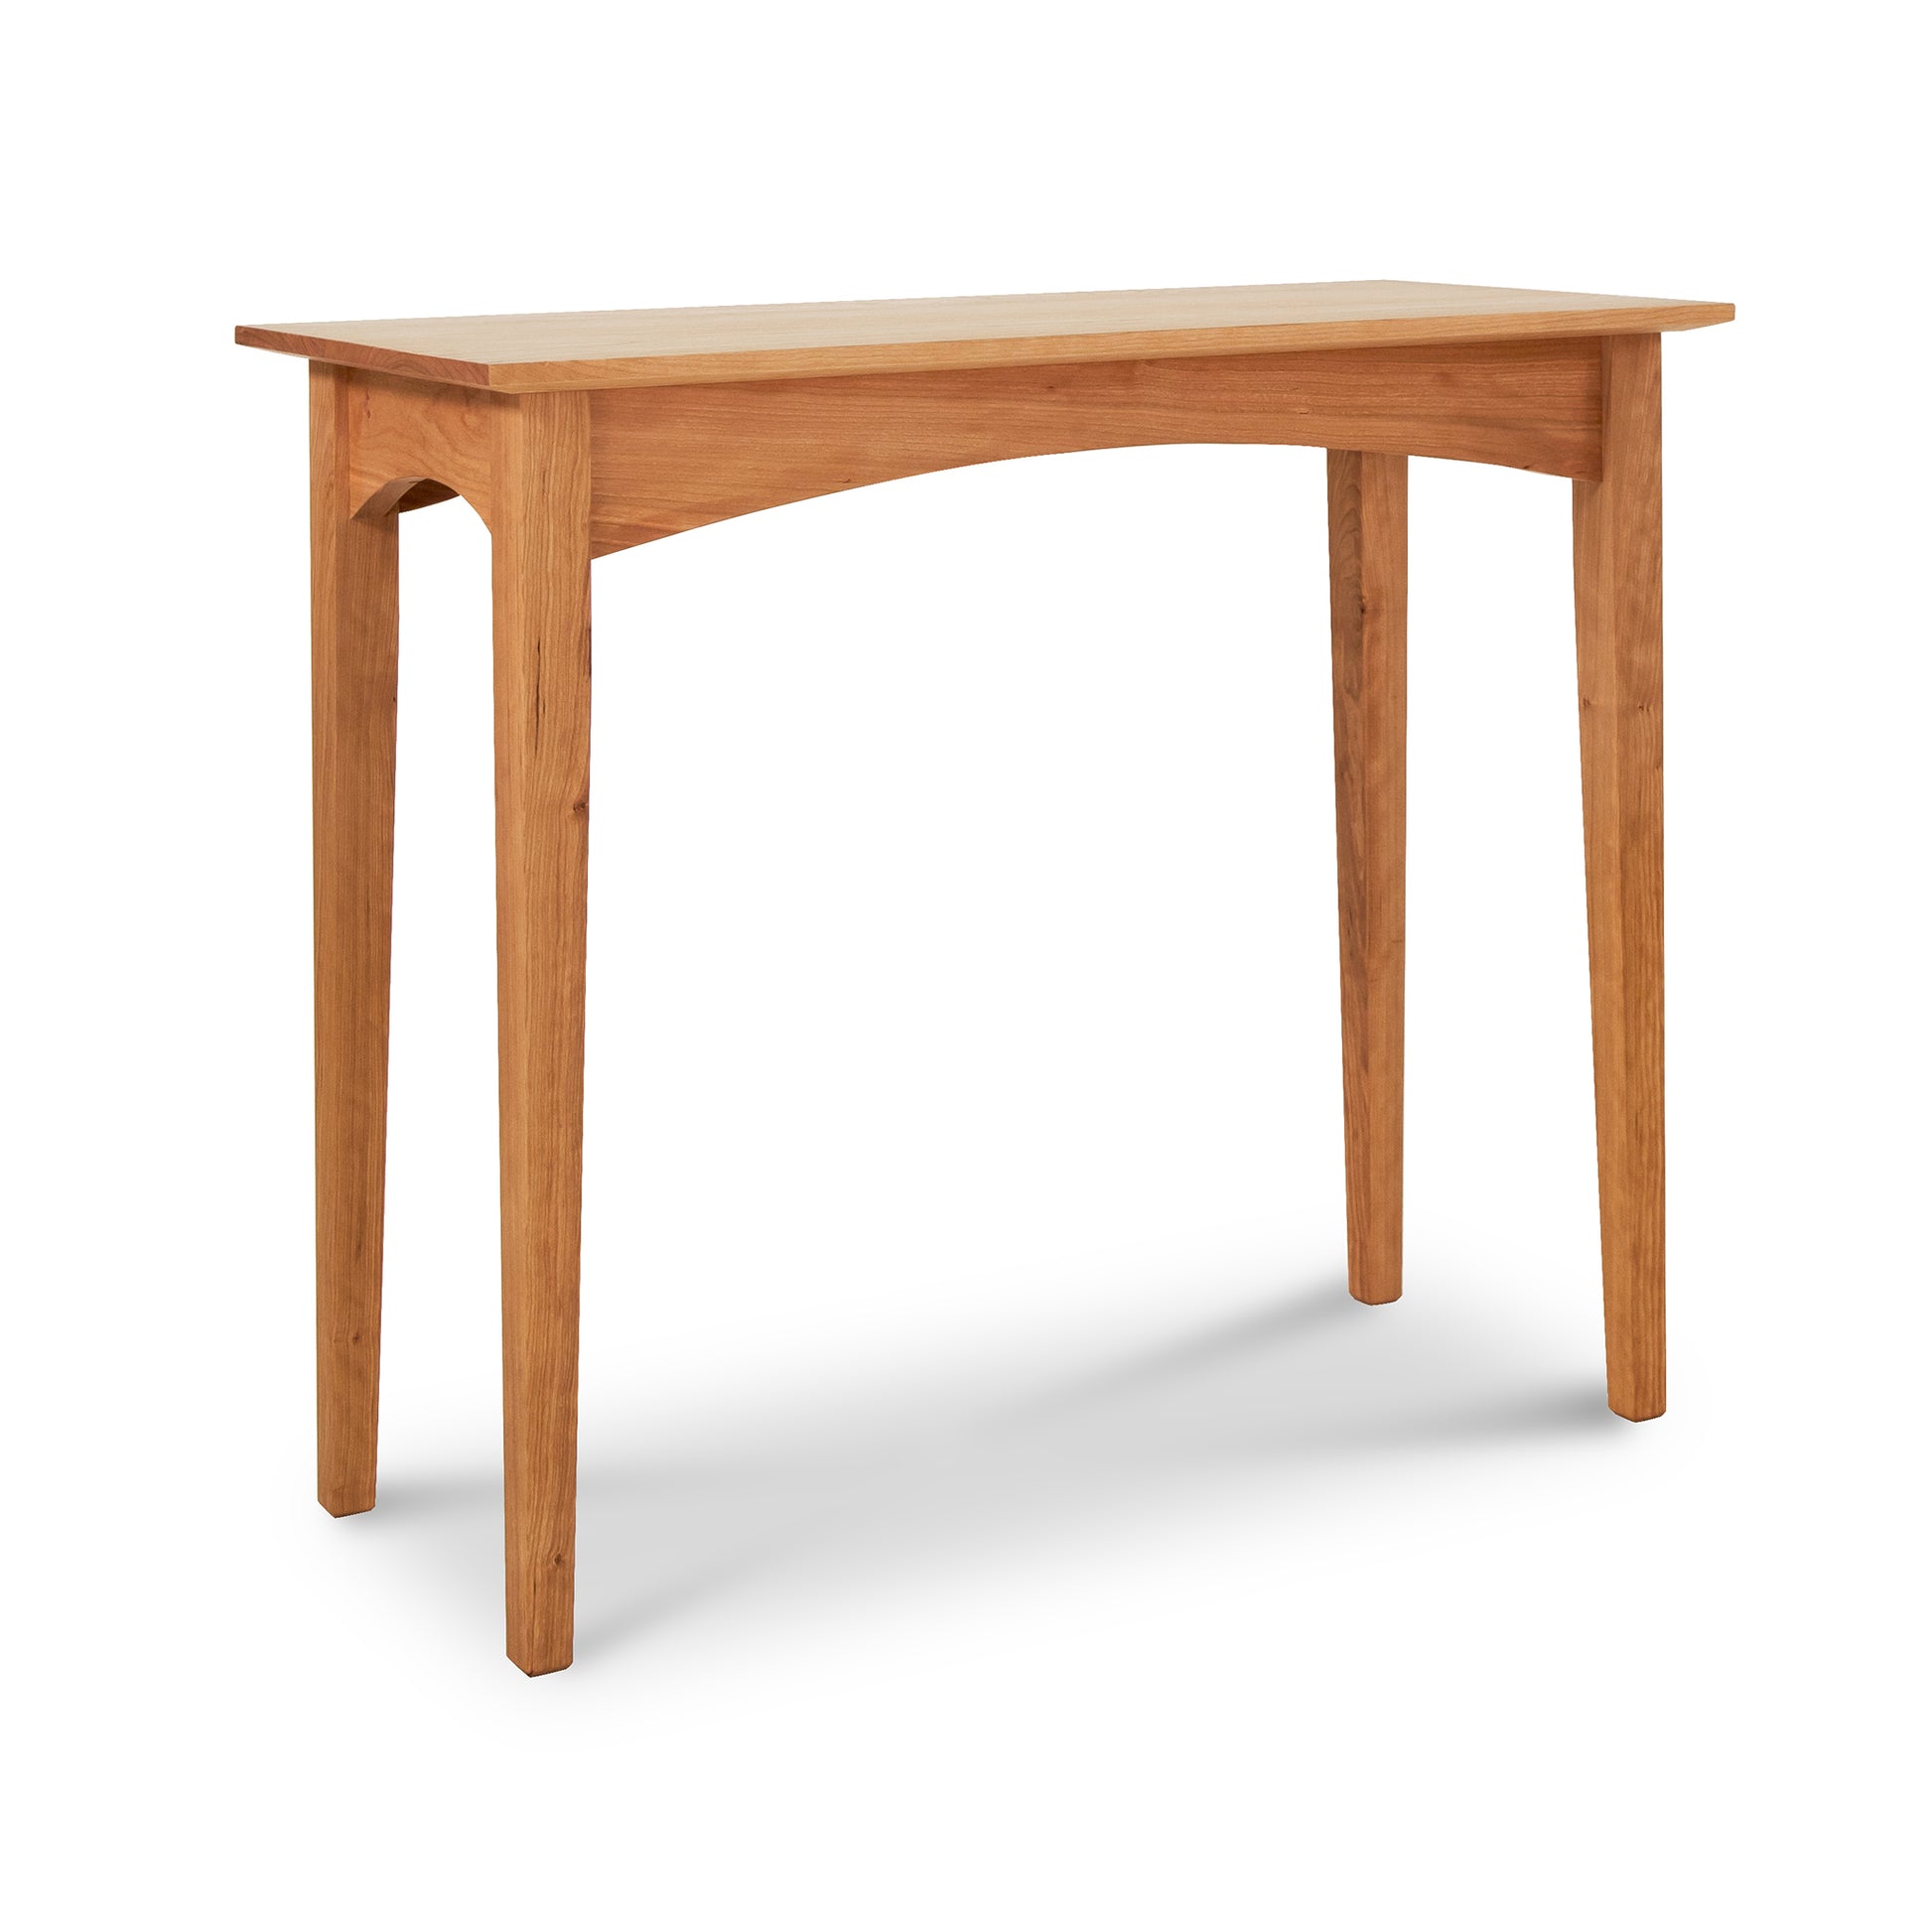 A American Shaker Sofa Table from Maple Corner Woodworks with a rectangular top and four legs, eco-friendly solid wood, isolated on a white background.